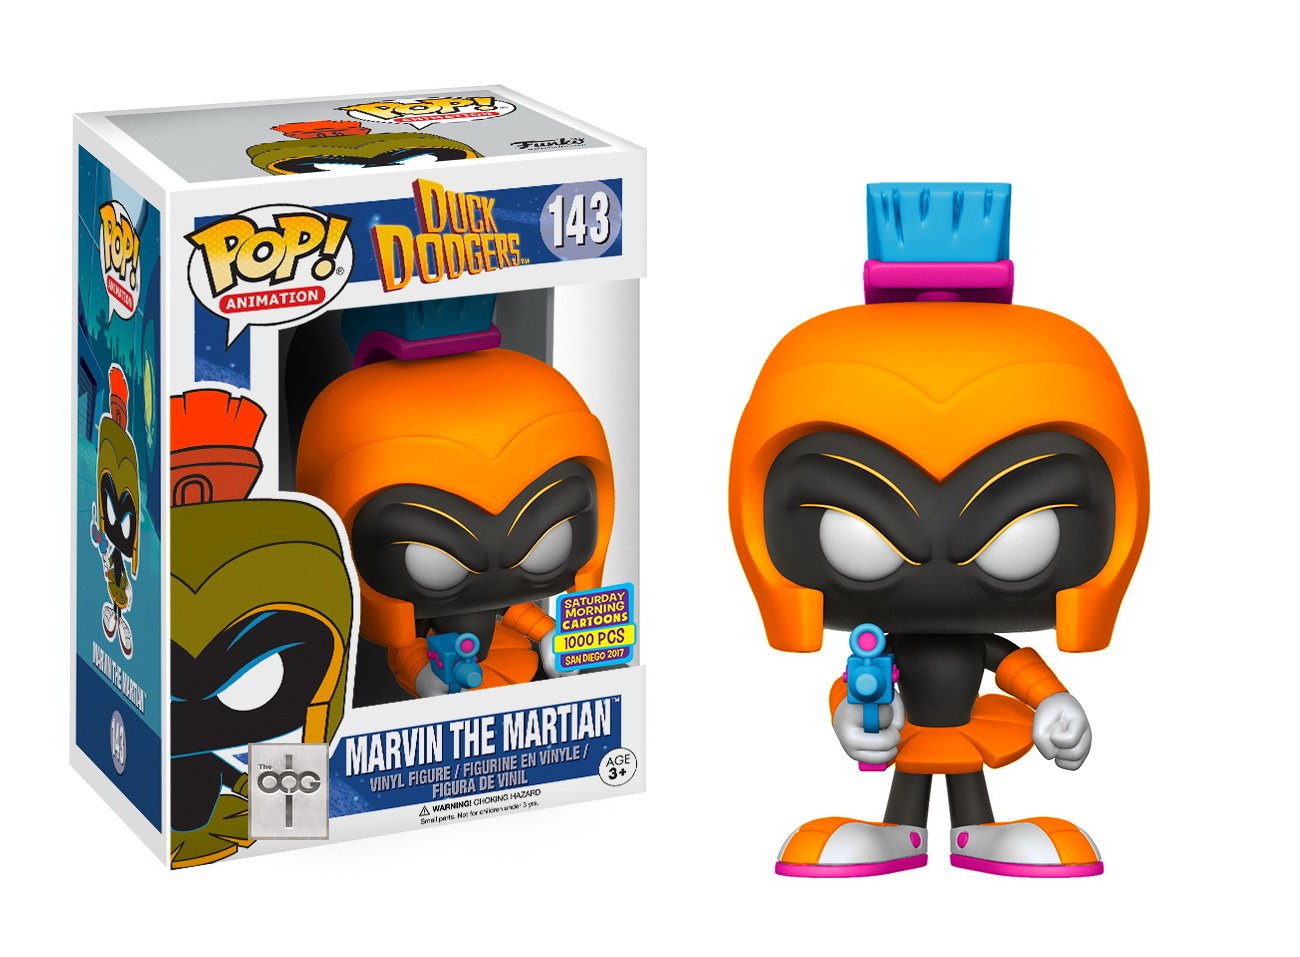 POP! Animation: 143 Duck Dodgers, Marvin The Martian (ORG) (1,000 PCS) Exclusive